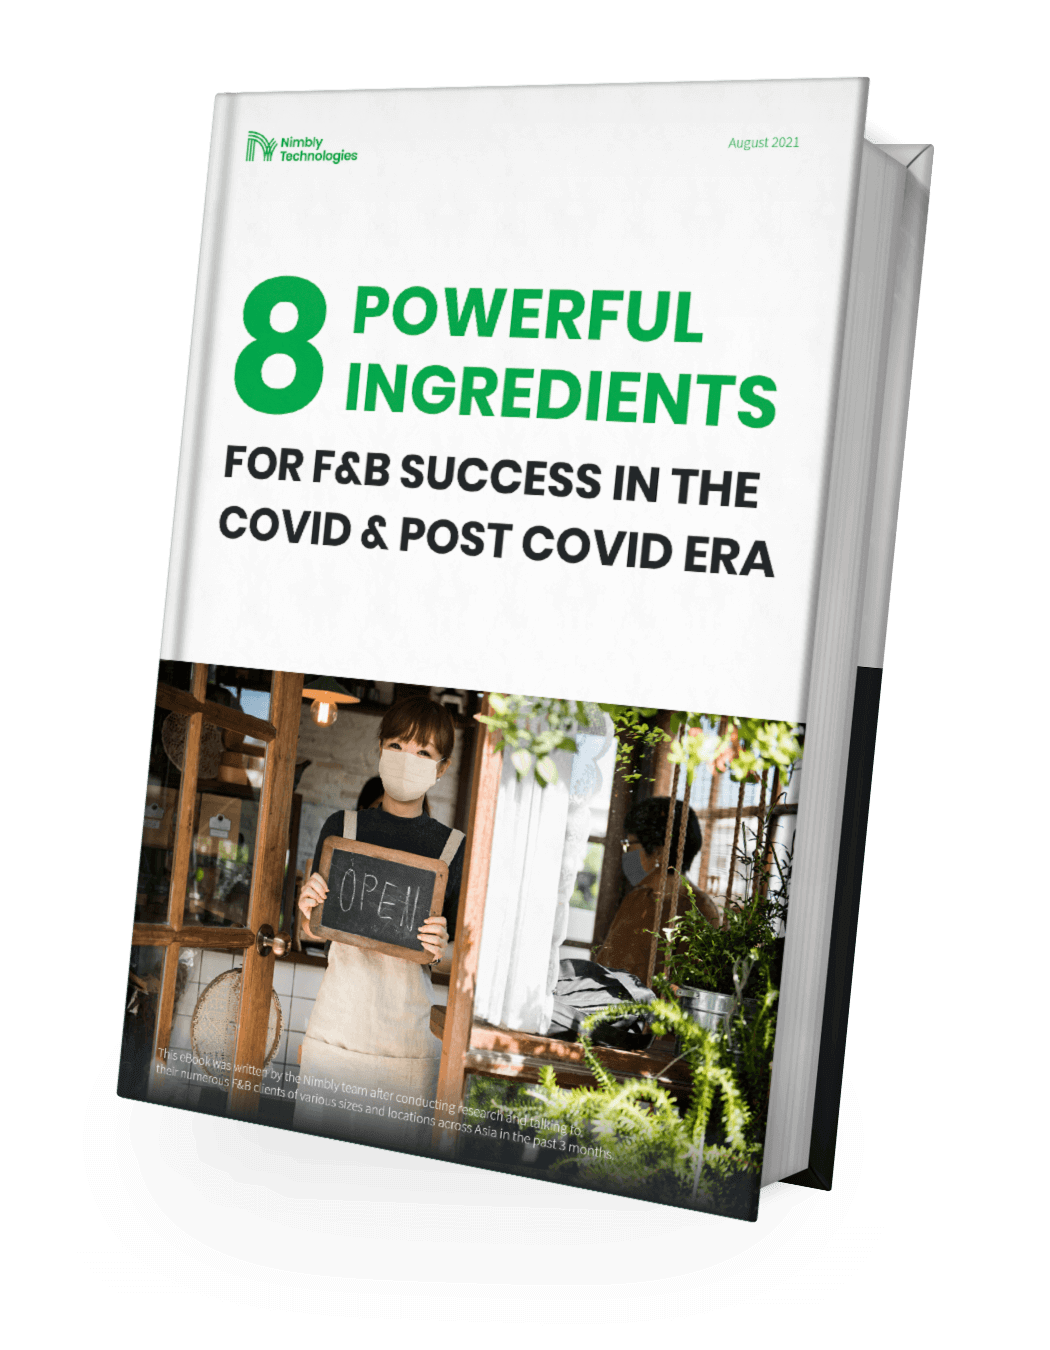 8 Powerful Ingredients for F&B Success in the COVID and Post COVID Era Free E-Book brought to you by Nimbly Technologies